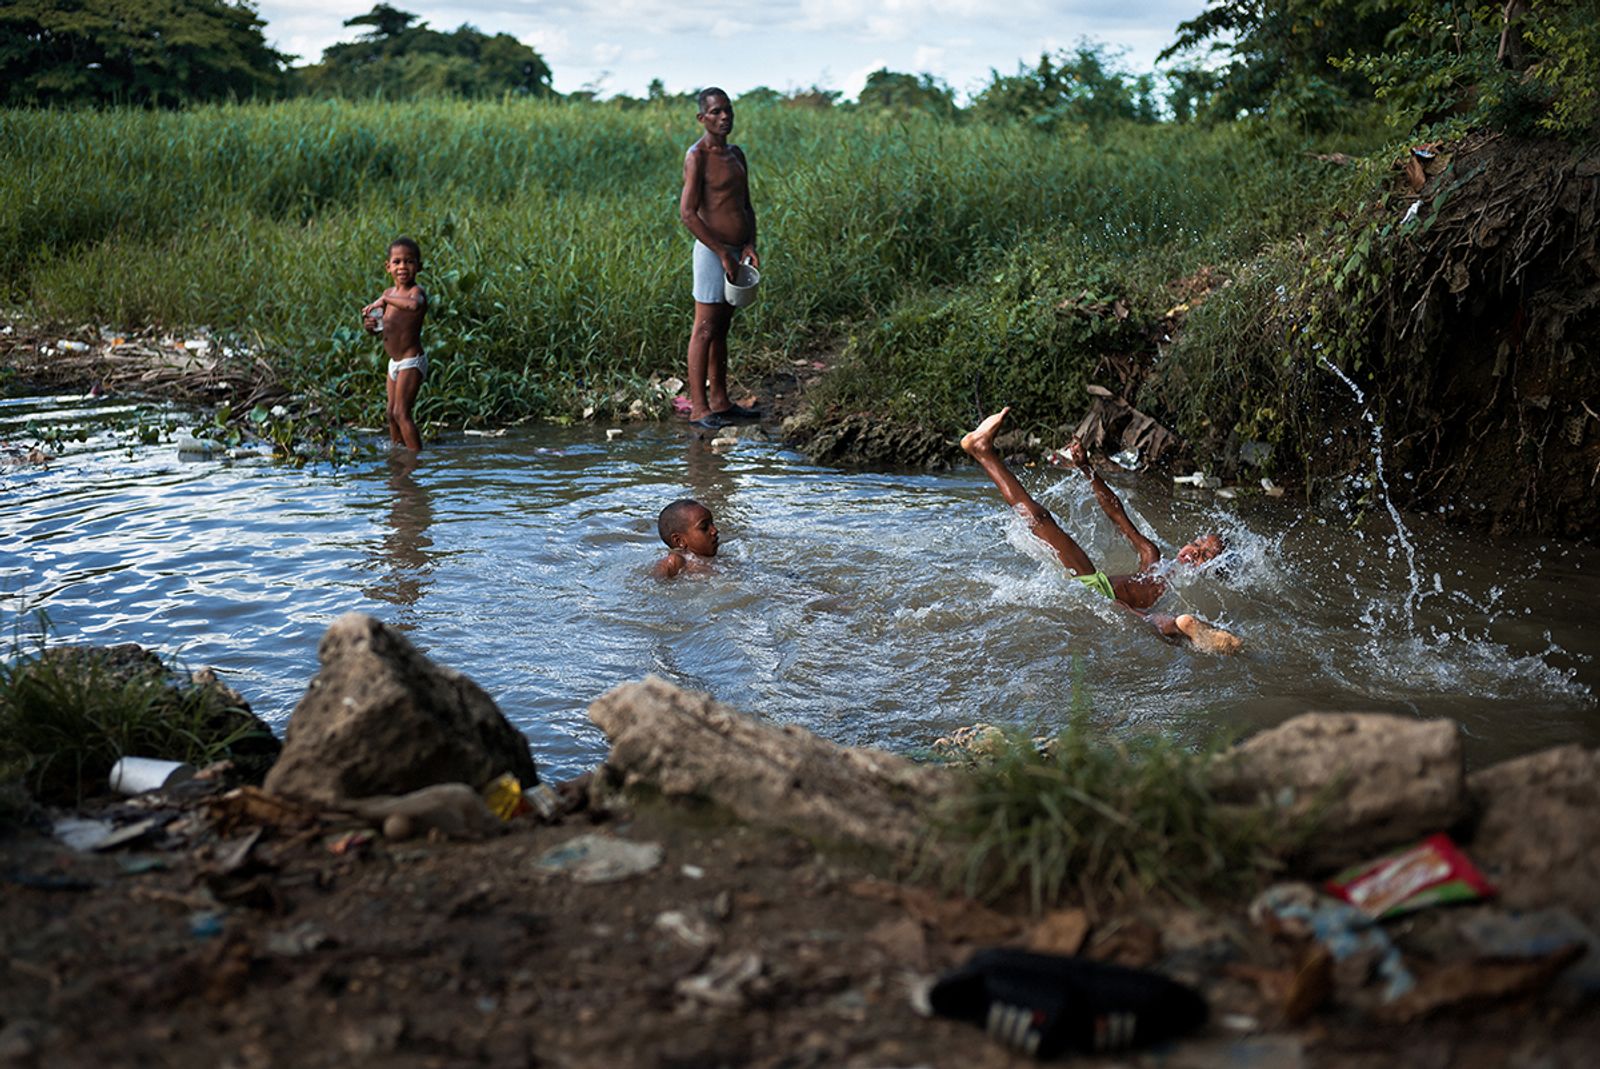 © Benjamin Petit - Image from the Climate Refugees Resettlement photography project